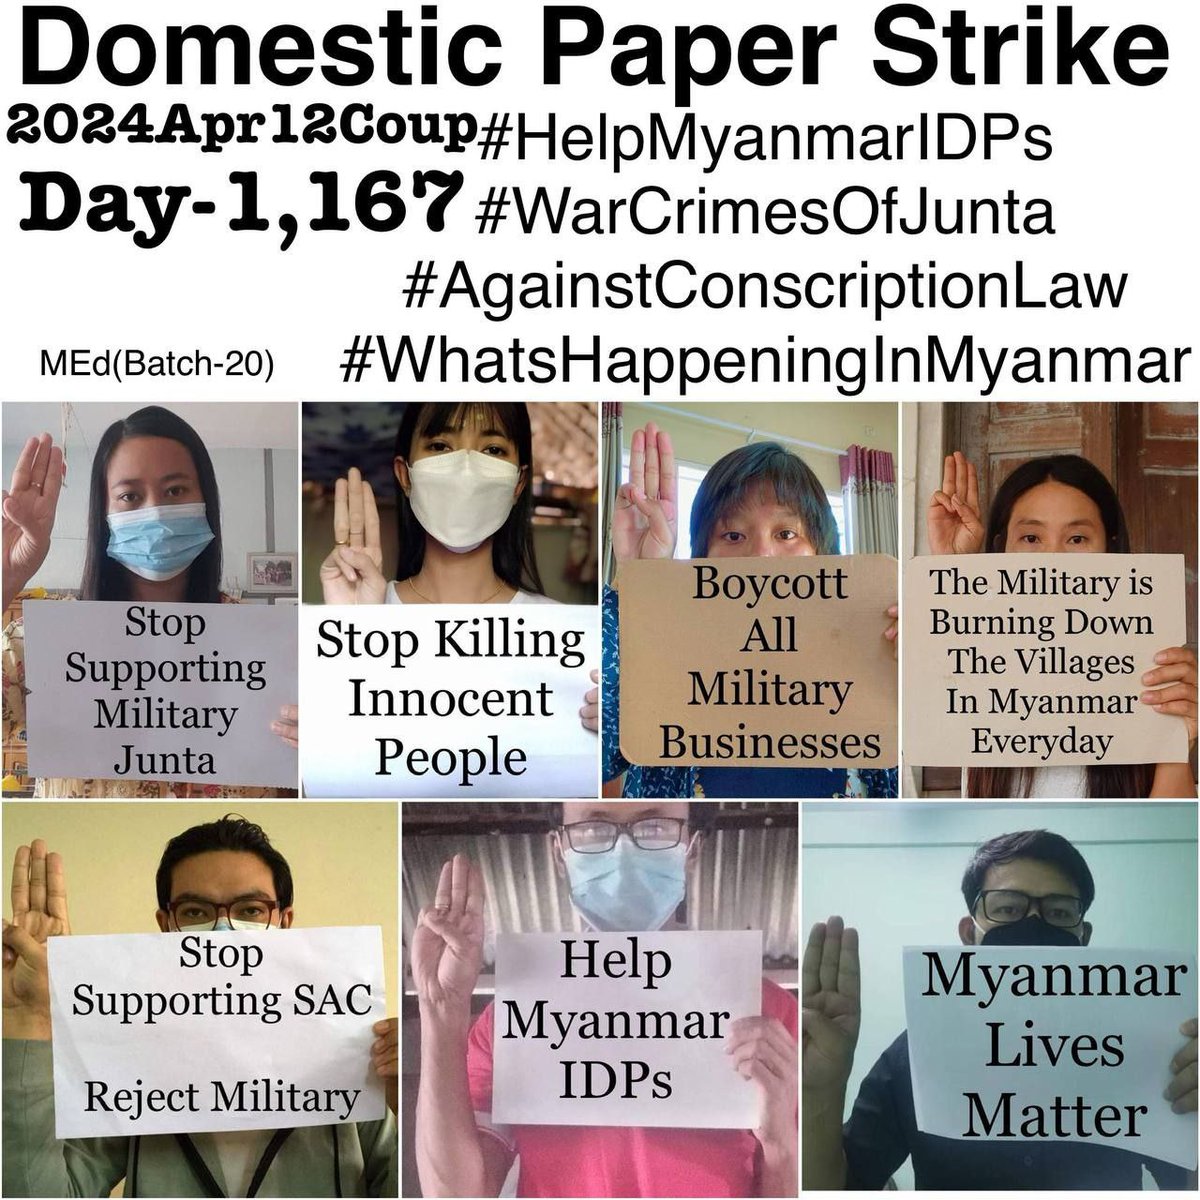 Daily anti-coup revolutionary domestic strike by pro-democracy CDMer teachers from Sagaing University of Education as 1,167th day.  #2024Apr13Coup #AgainstConscriptionLaw #WhatsHappeningInMyanmar